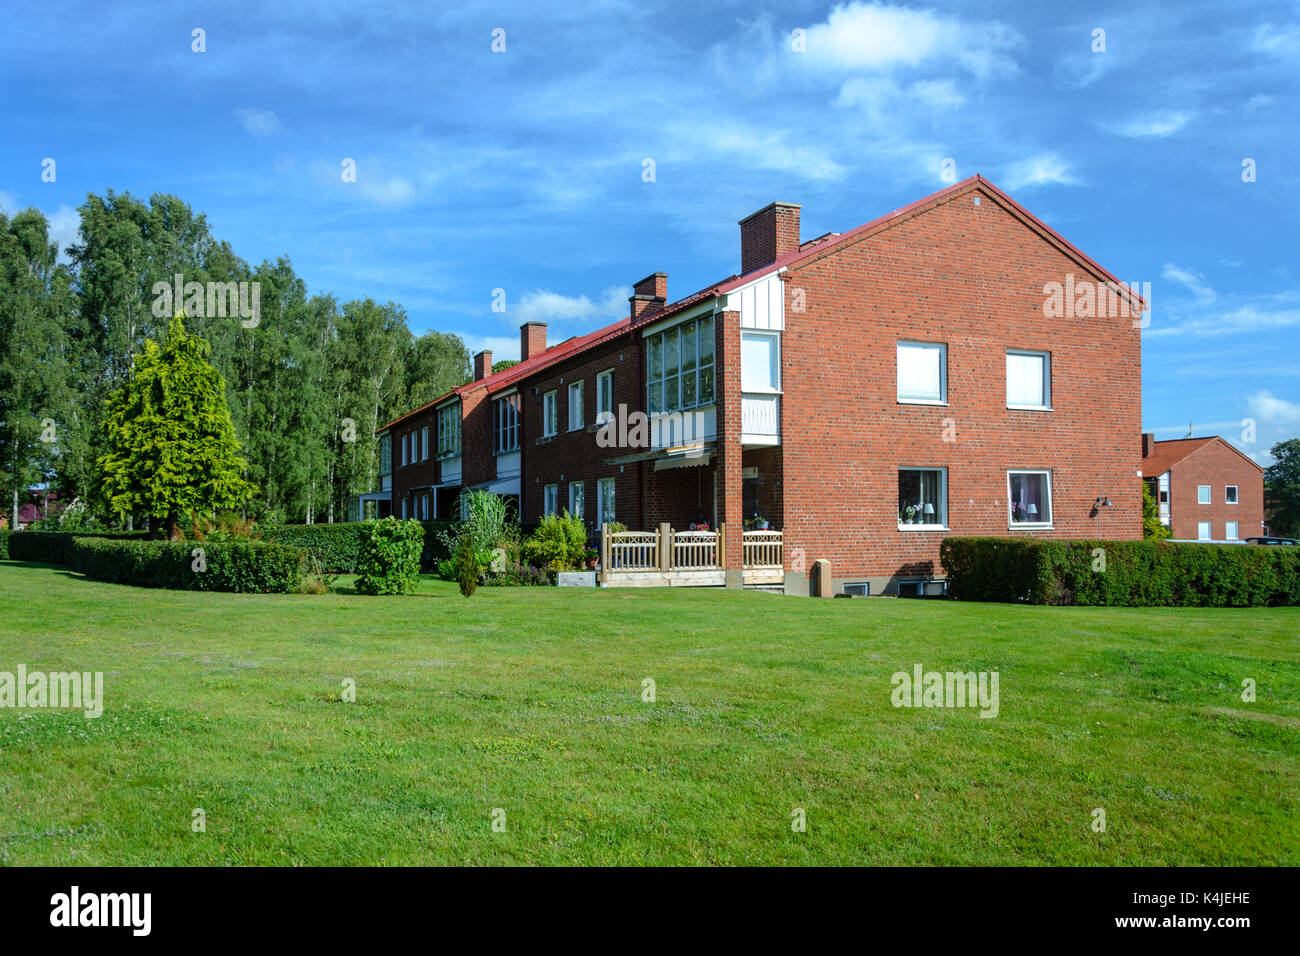 Veberod, Sweden - July 22, 2017:  Typical Swedish buildings multi-family houses in a small town and on the outskirts of the agglomeration. Stock Photo